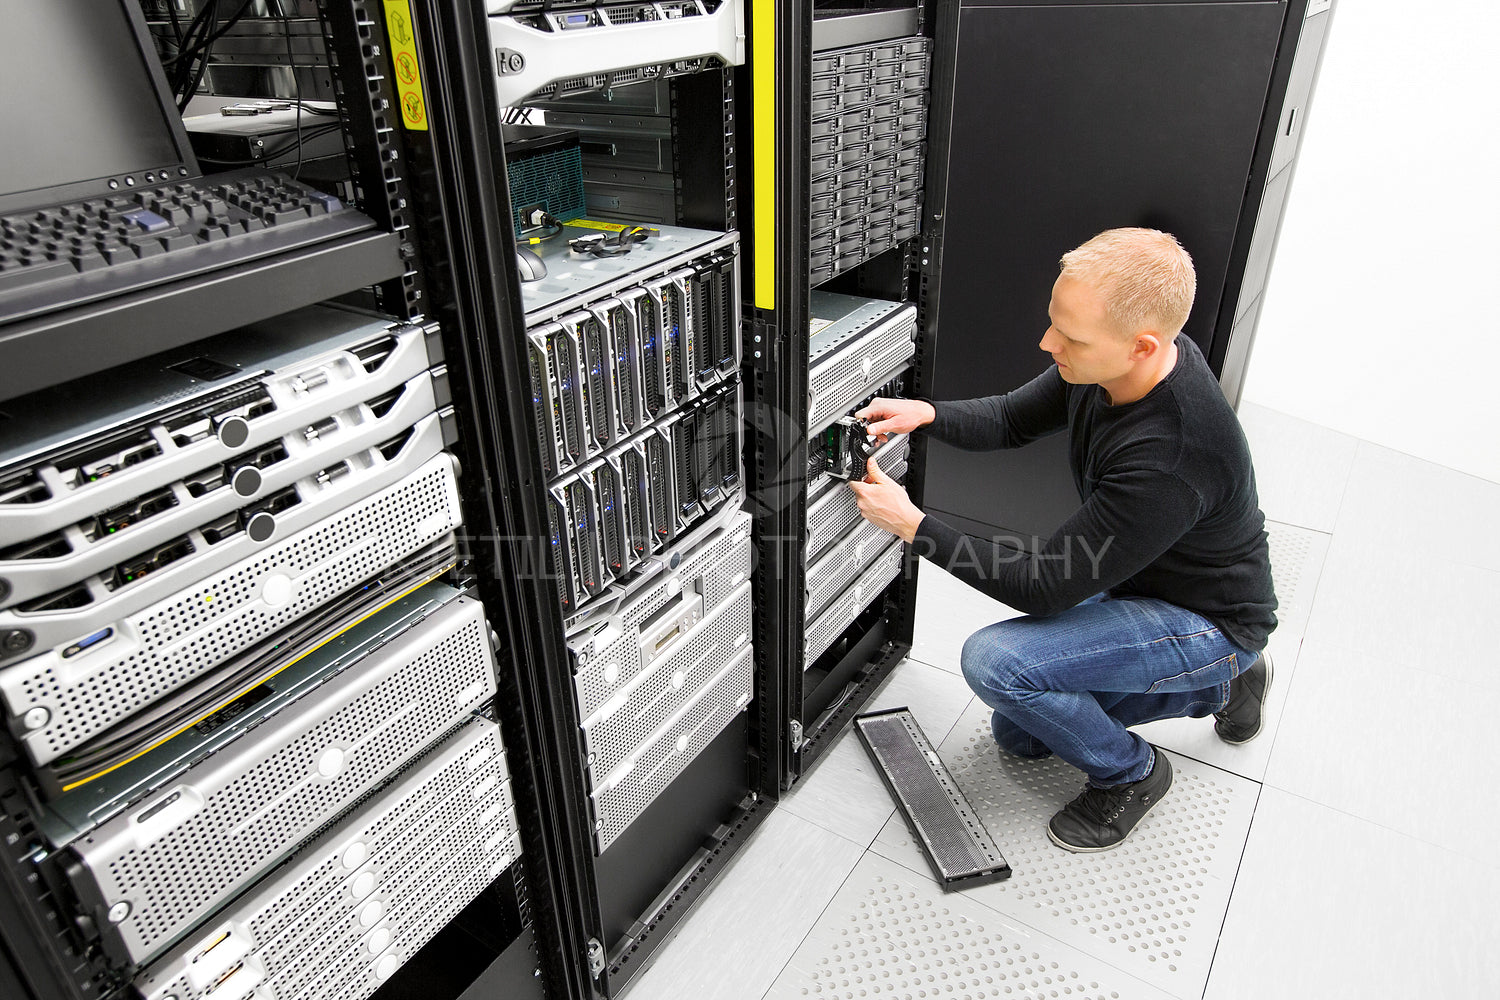 It engineer replace harddrive in datacenter